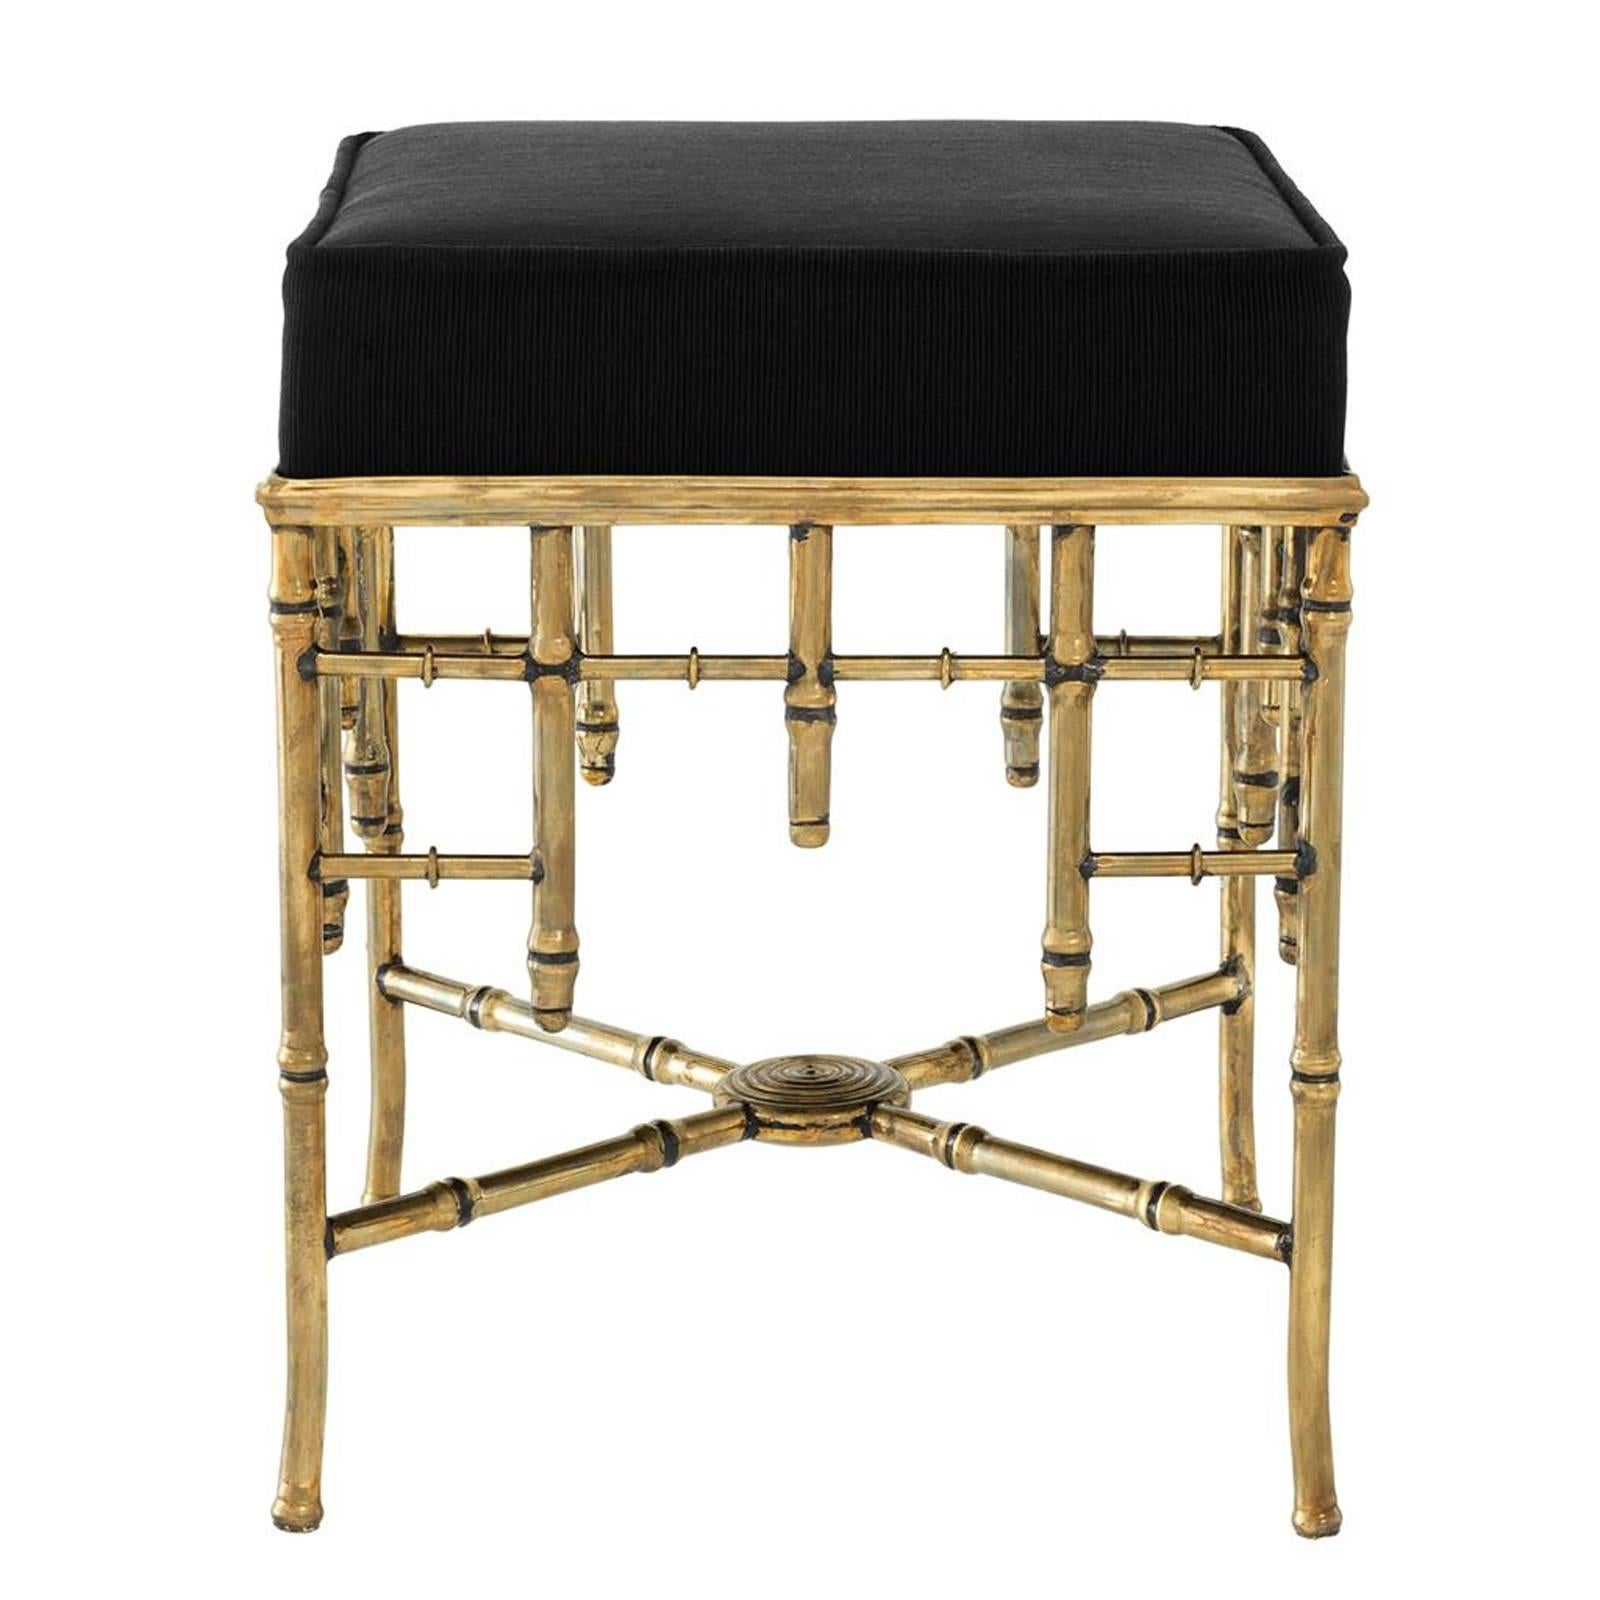 Hand-Crafted Reed Square in Vintage Brass Finish and Black Velvet Seat